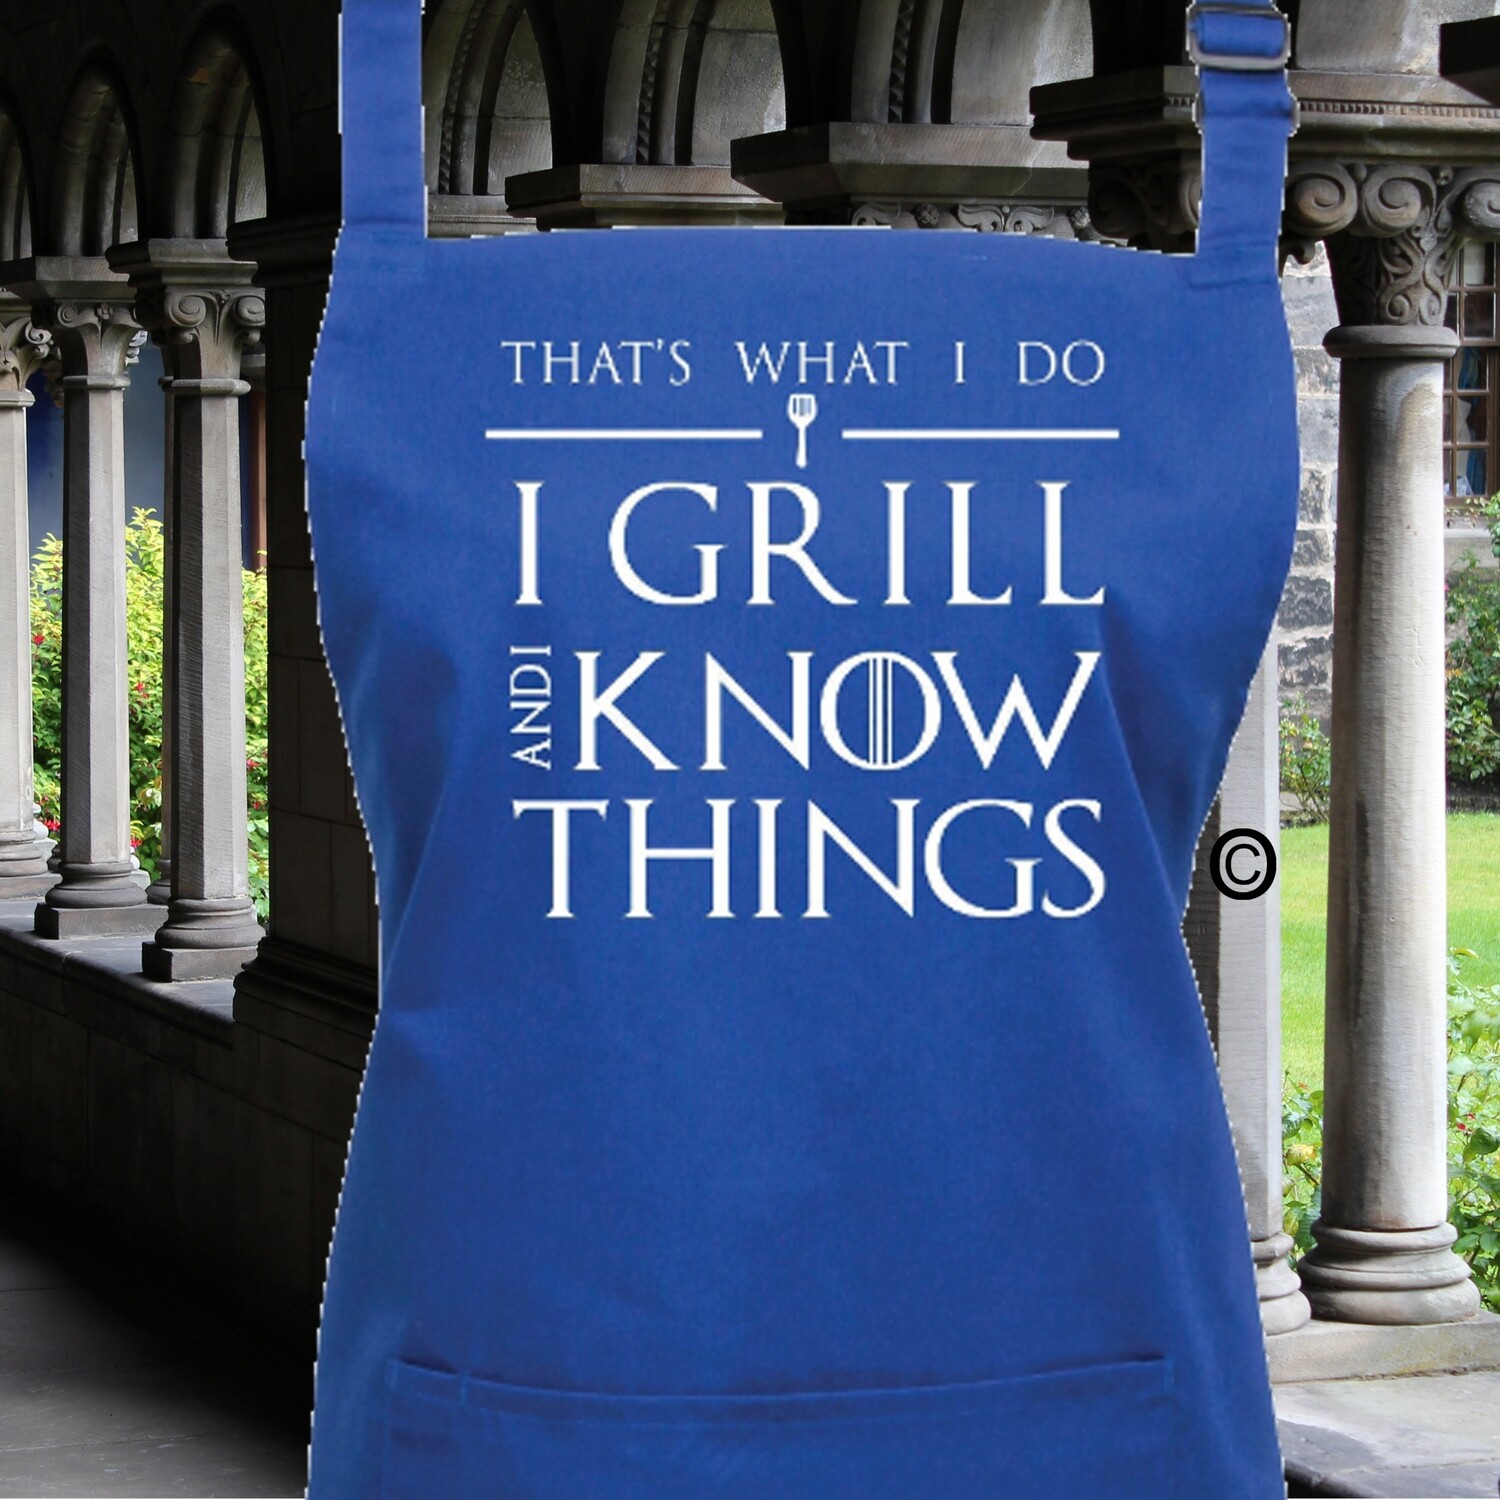 I Grill &amp; I Know Things! Game of Thrones Apron.